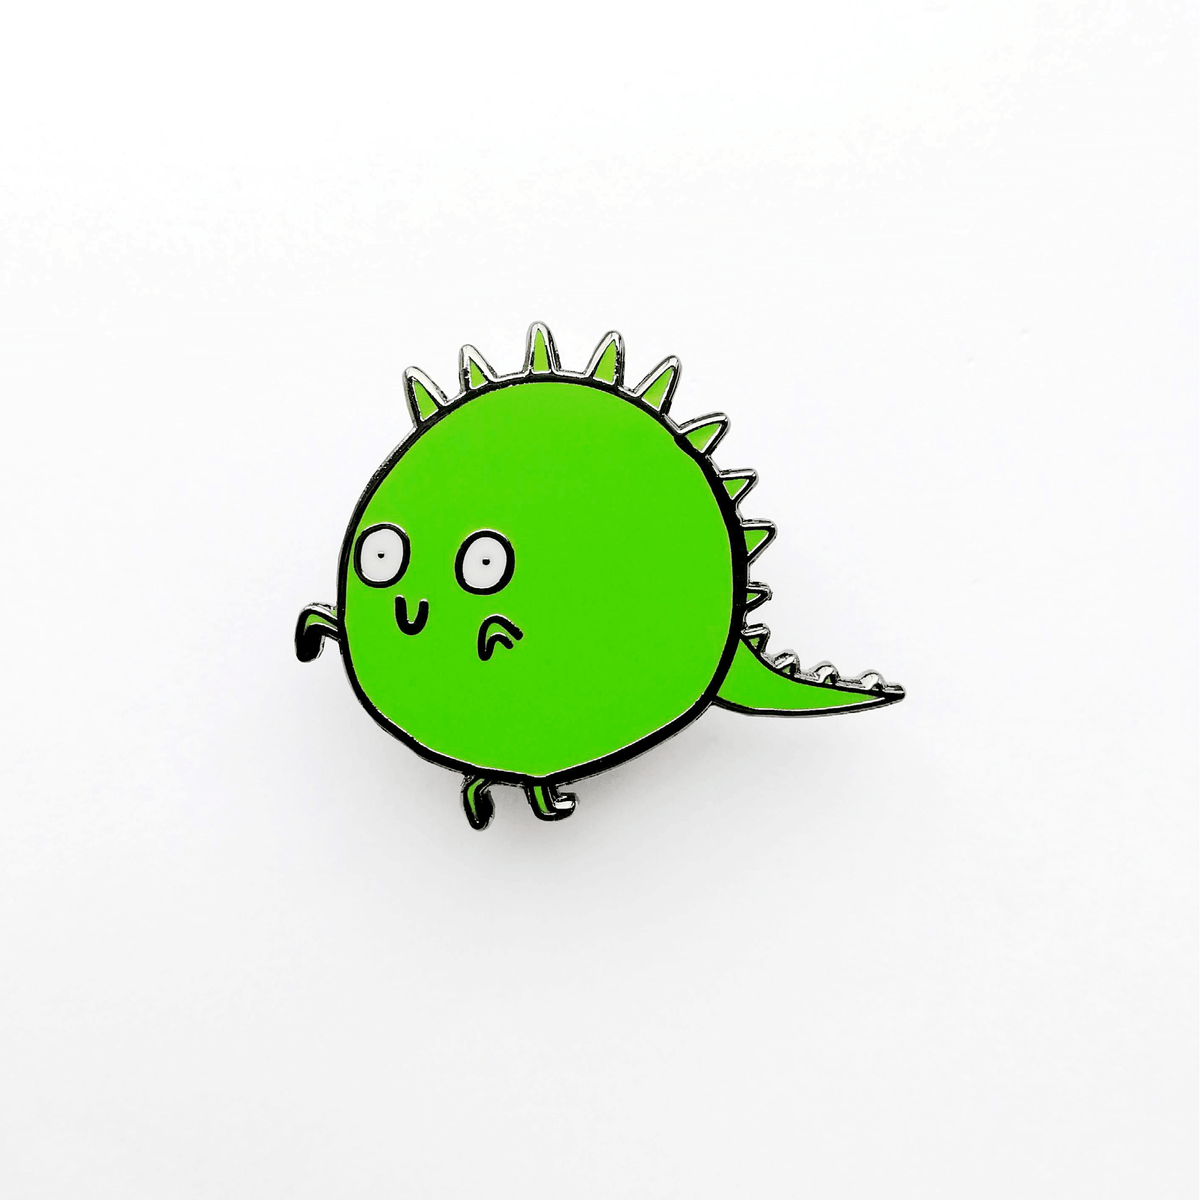 Pea Rex Hard Enamel Pin by Katie Abey - Whale and Bird